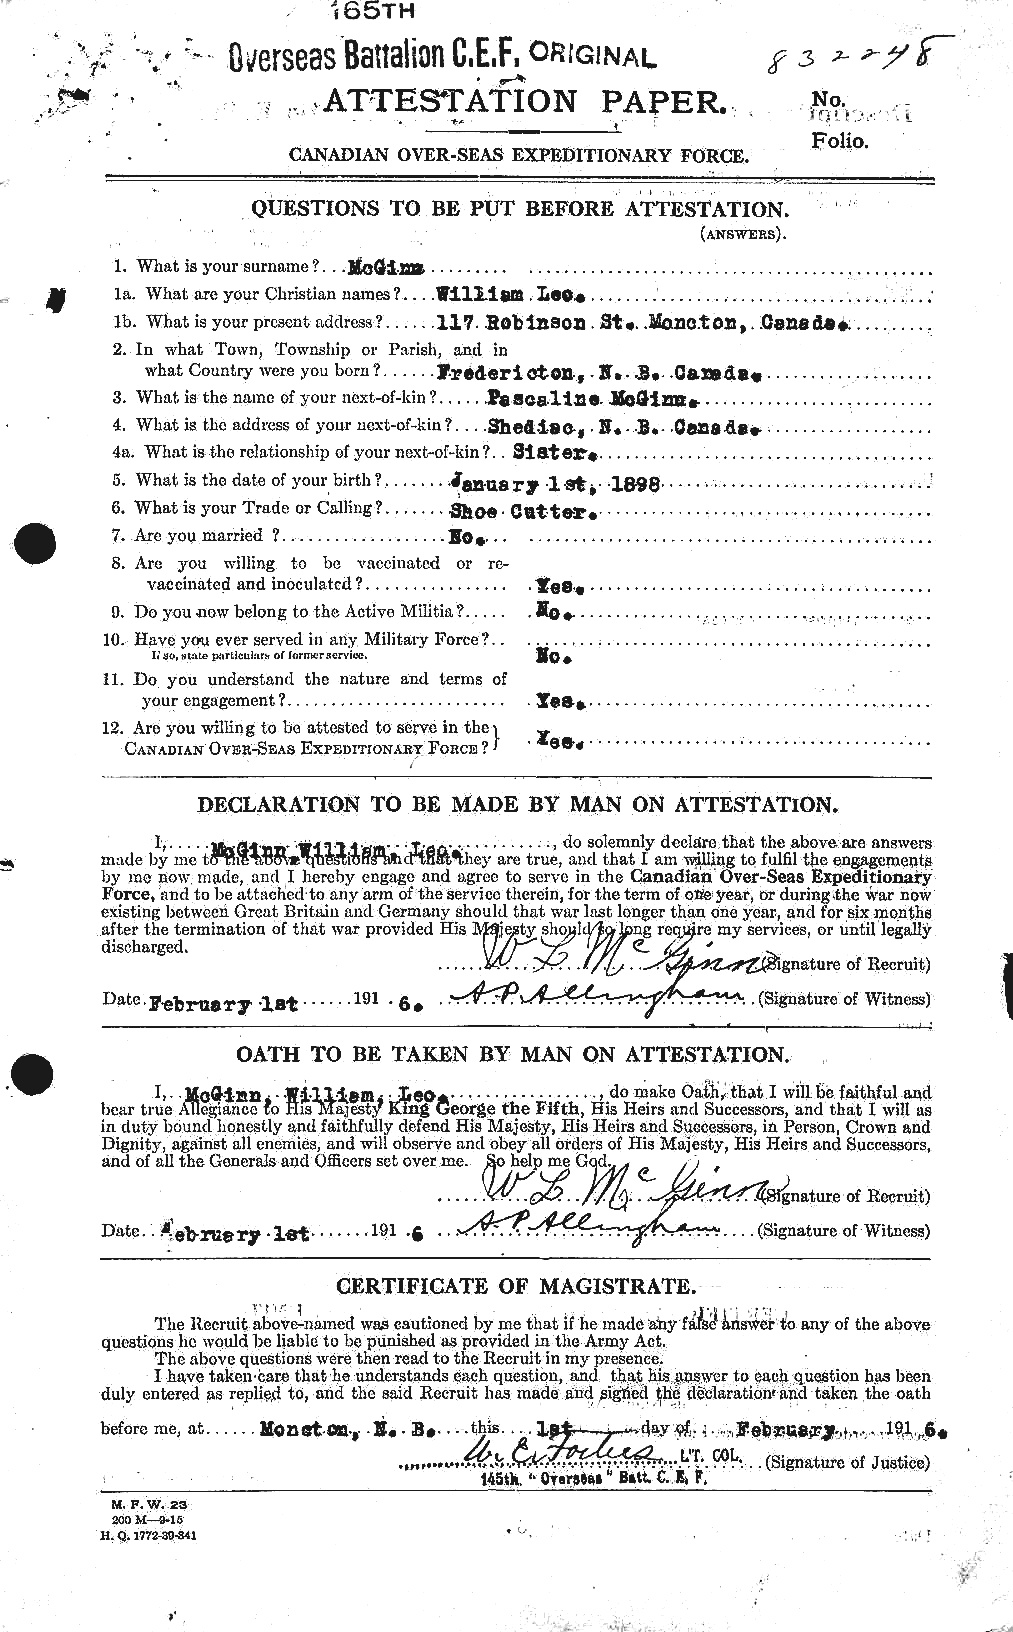 Personnel Records of the First World War - CEF 526354a